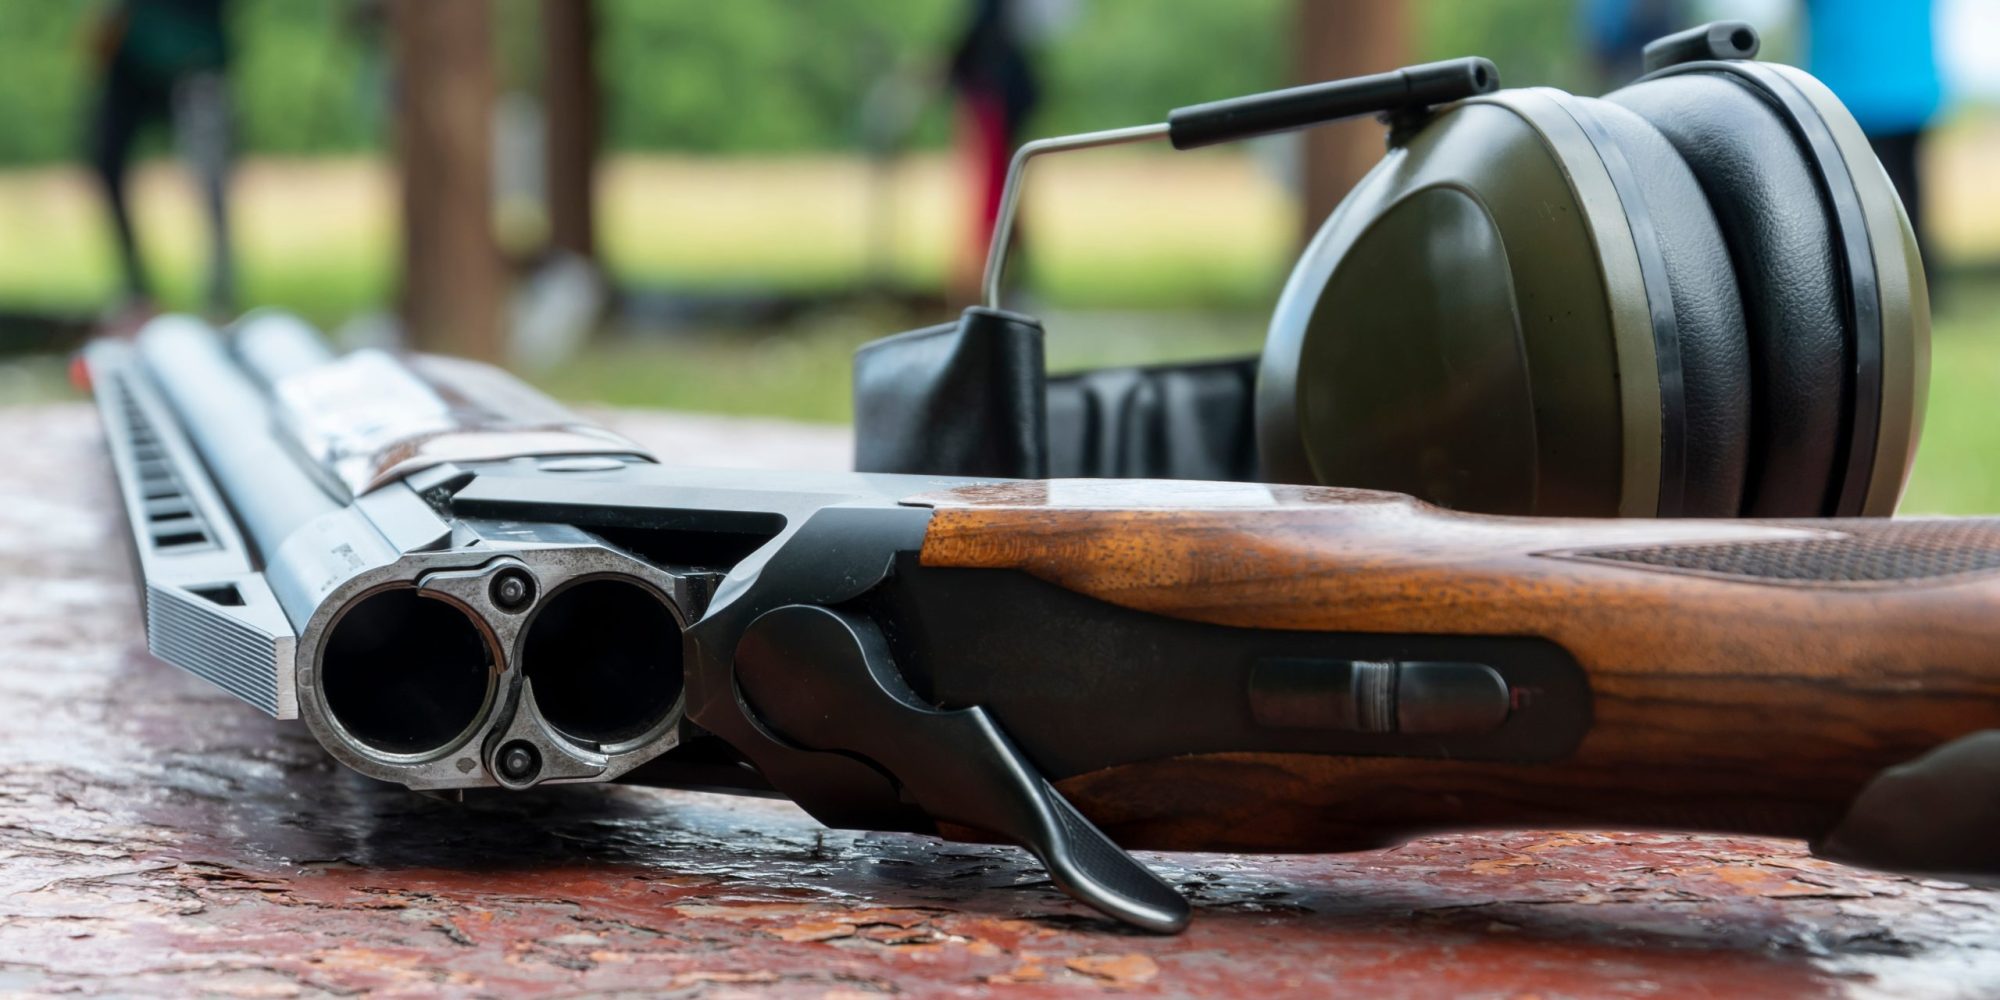 A sports double-barreled shotgun and headphones for shooting lie on a wooden table against the background of the shooting range.